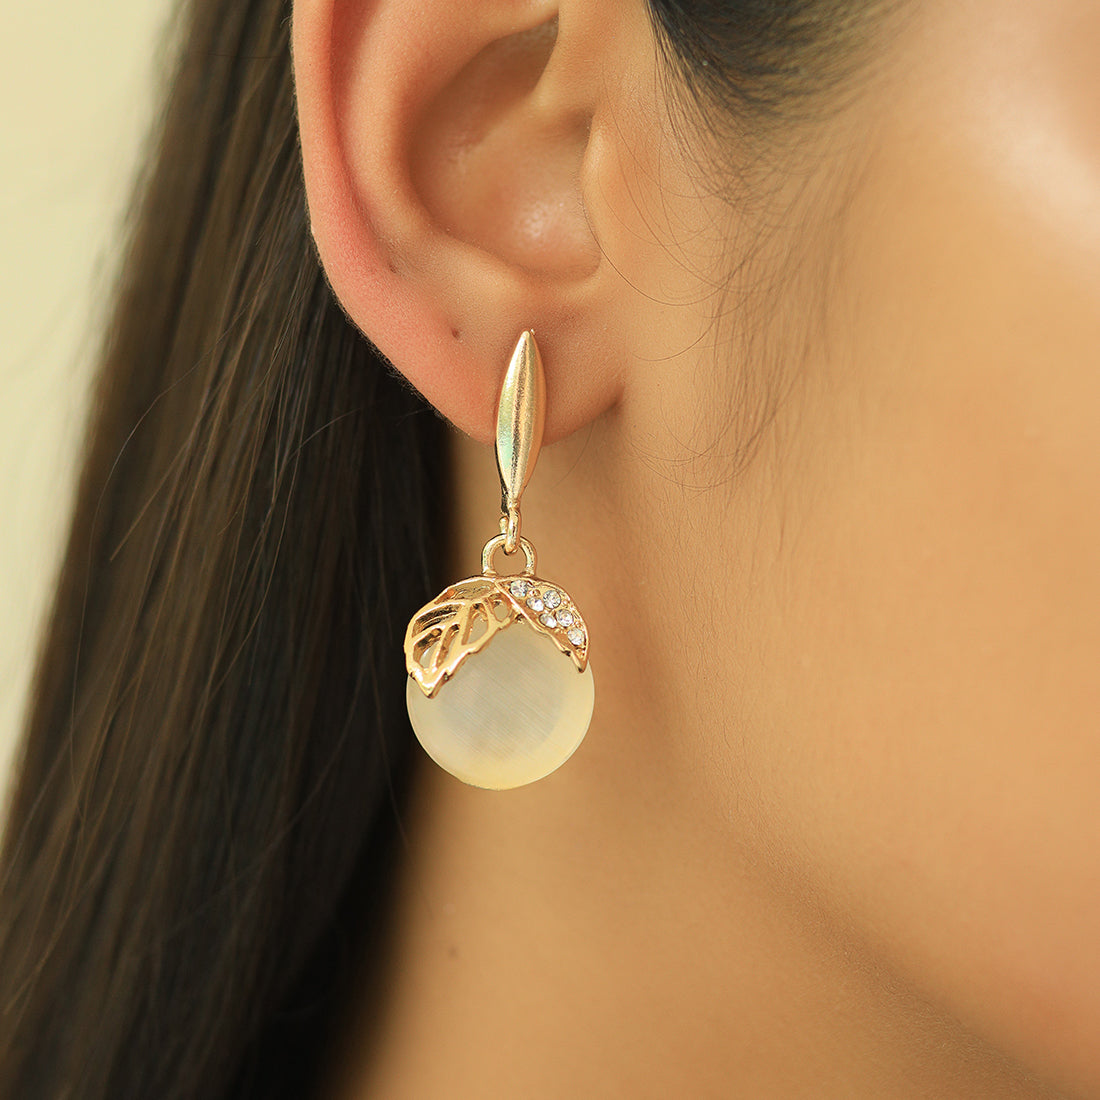 Elegant Leaf Pattern Gold-Toned Earrings With Moonstone And Diamonti Drops